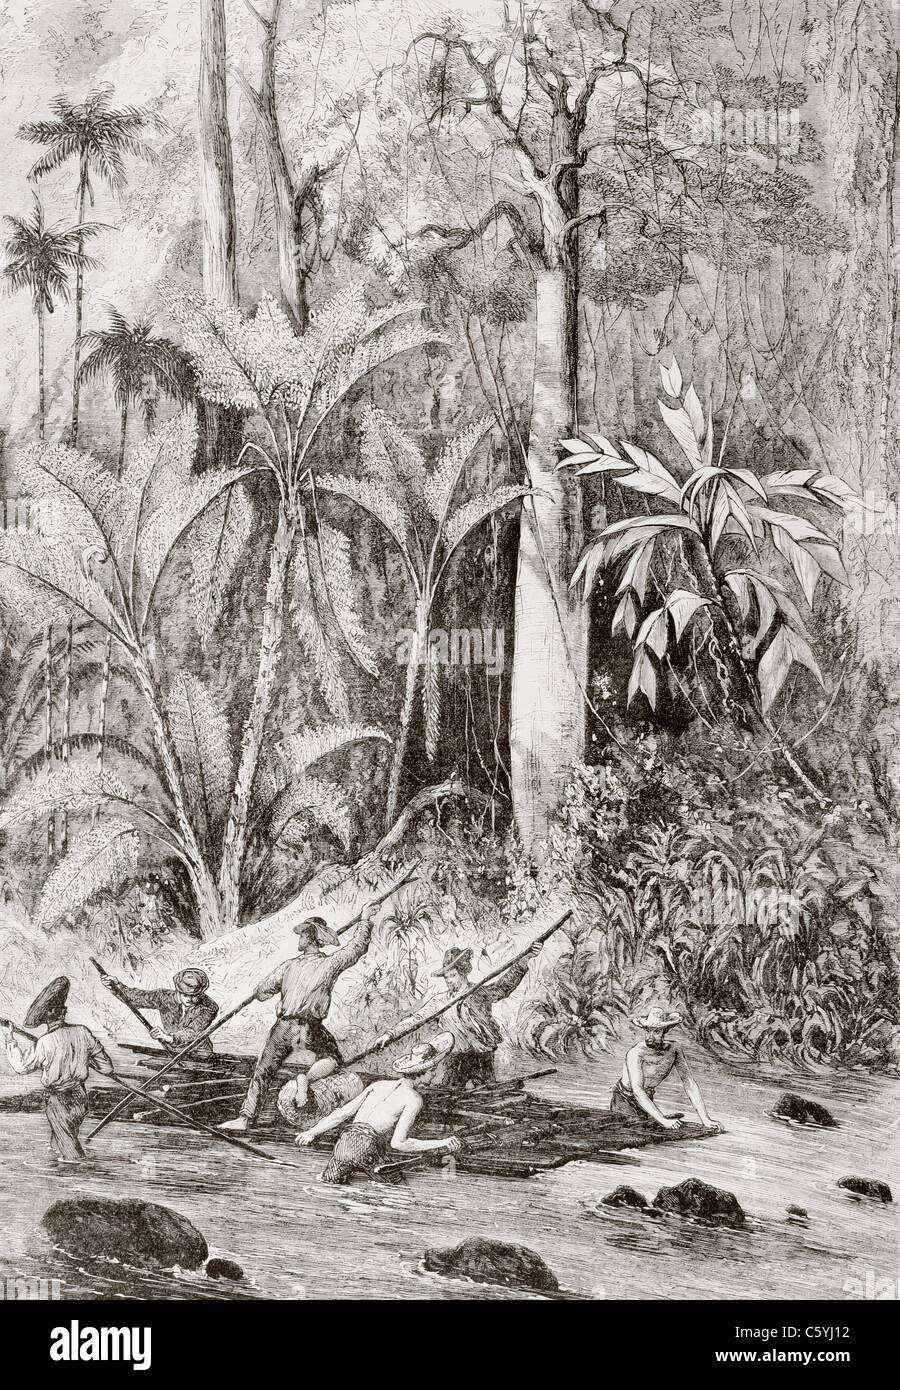 Expedition of 1867 searching for a route through Nicaragua for a trans-oceanic canal, led by Englishman Captain Bedford Pim. Stock Photo